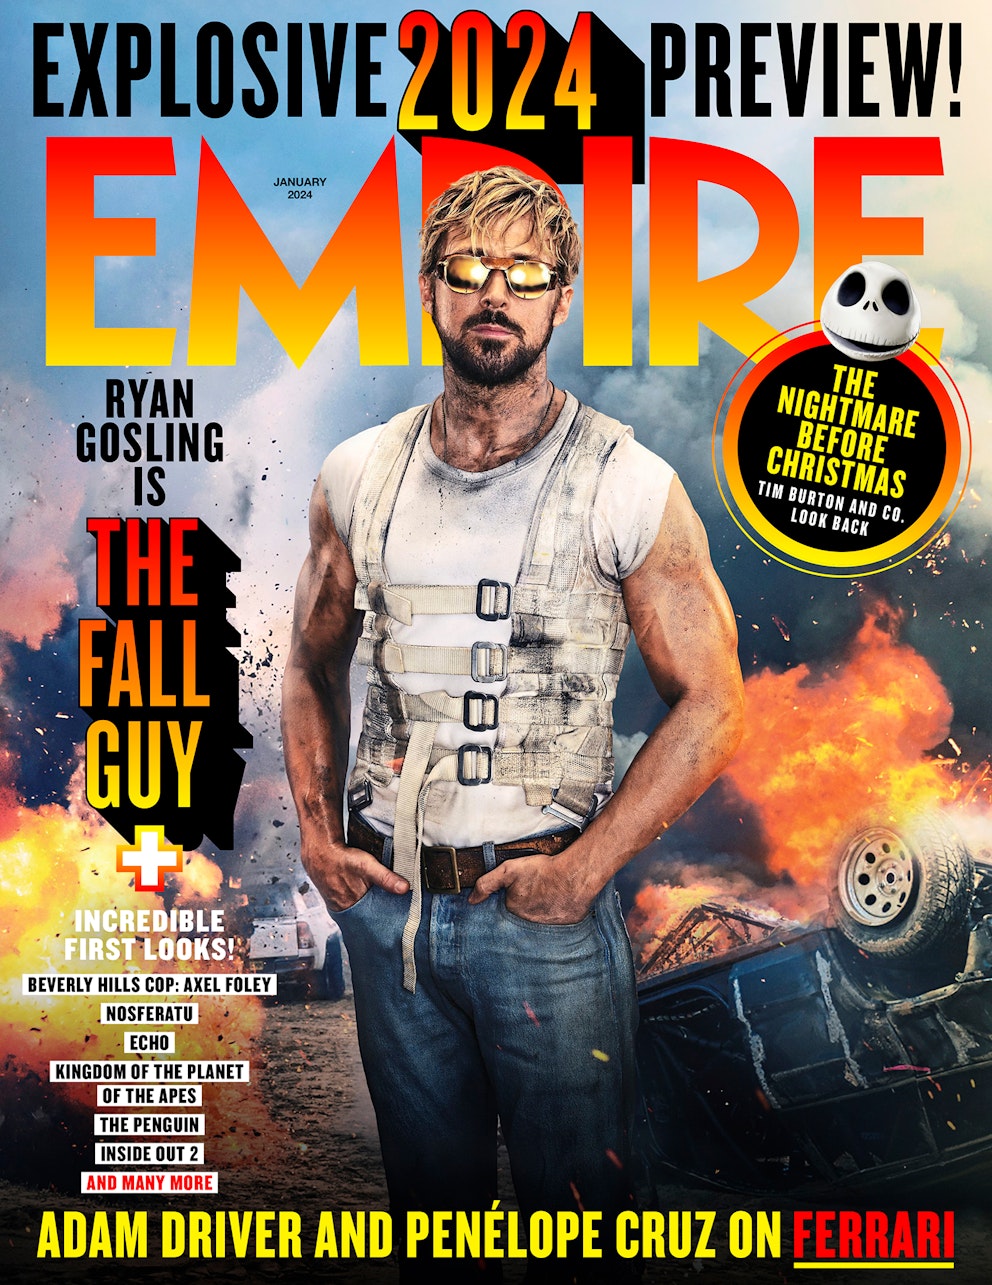 Empire’s The Fall Guy Cover Leads The 2024 Preview Issue